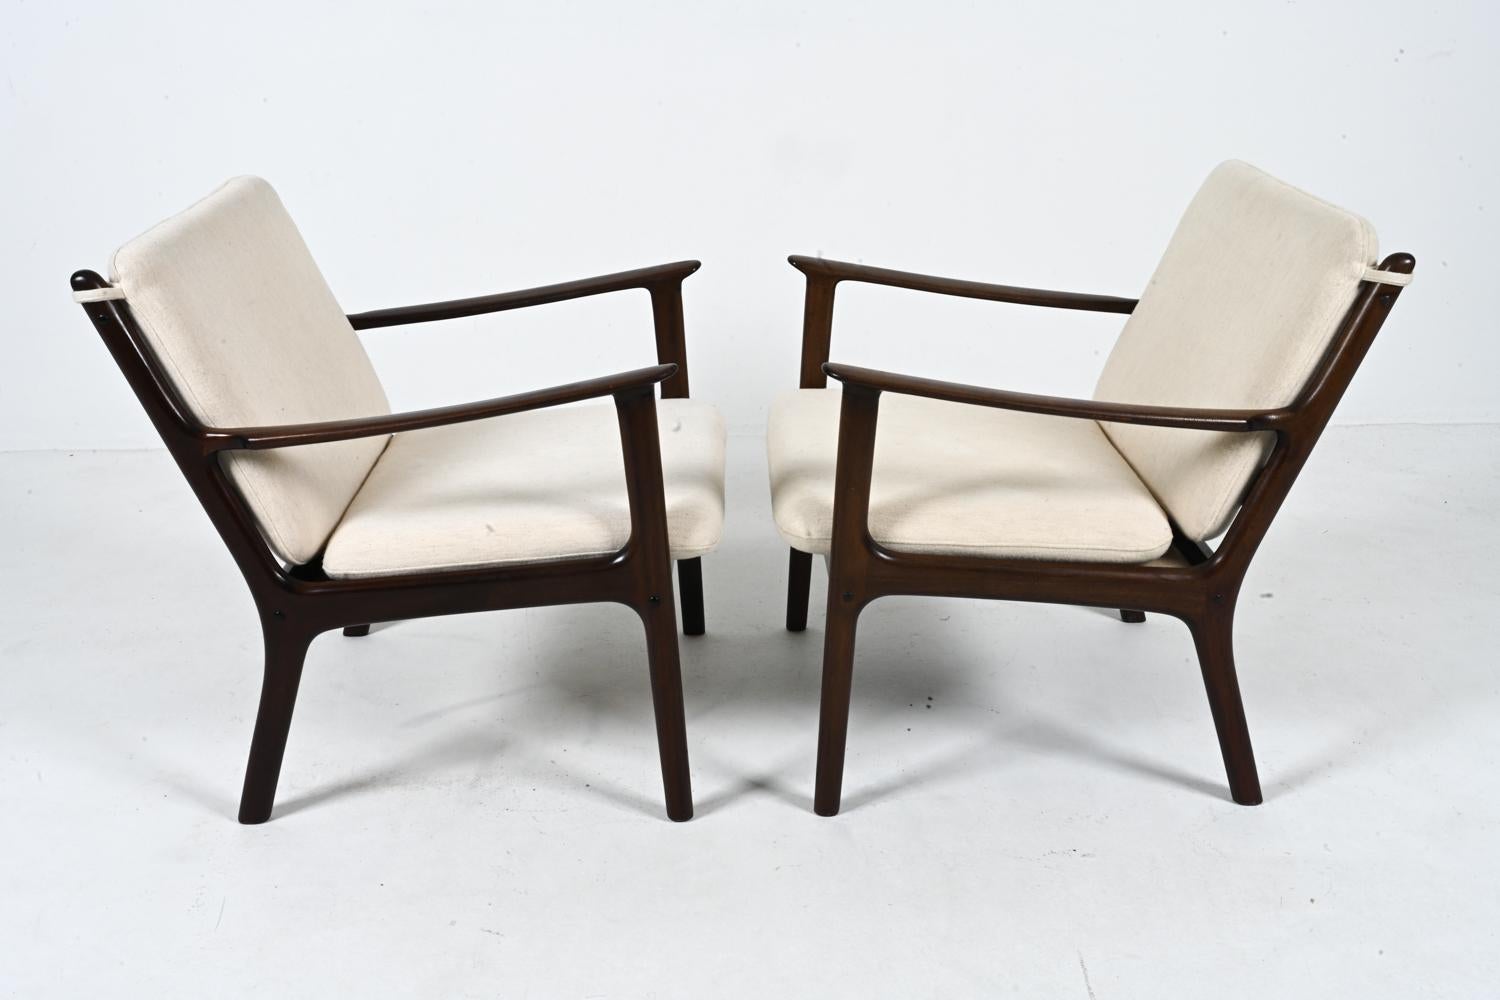 Pair of Mahogany Lounge Chairs, Model PJ 112 by Ole Wanscher for Poul Jeppesen In Good Condition For Sale In Norwalk, CT